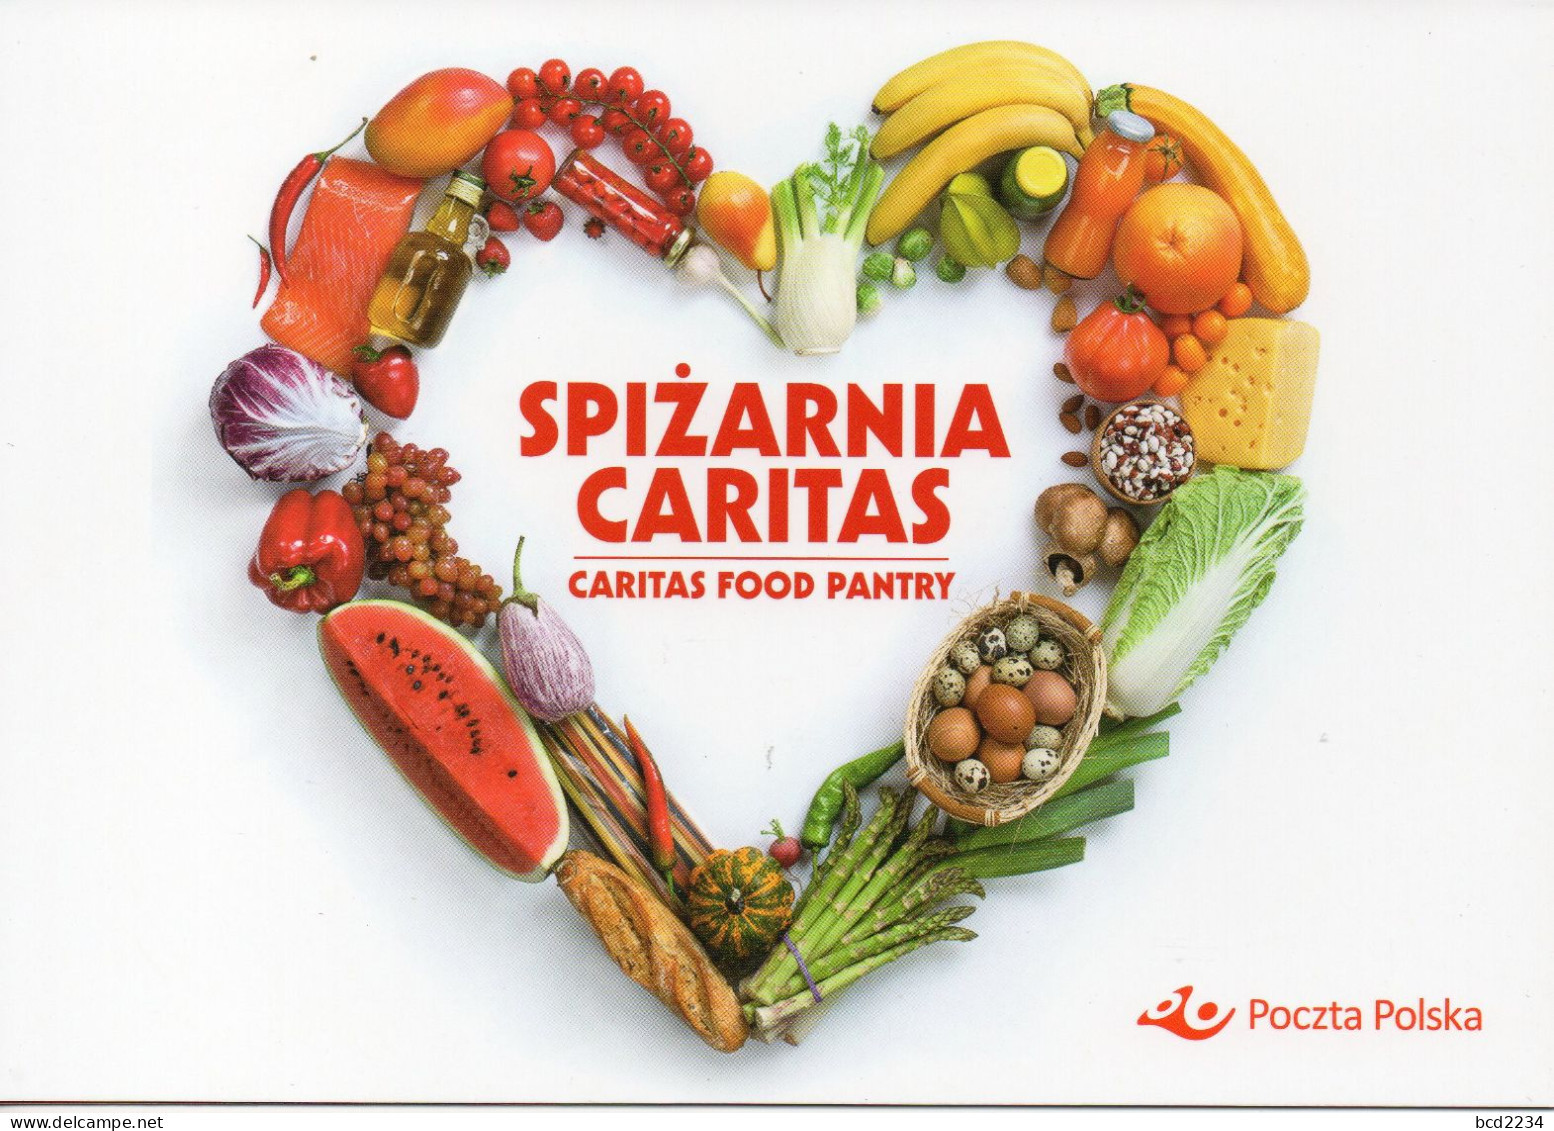 POLAND 2023 POST LIMITED EDITION PHILATELIC FOLDER: CARITAS FOOD PANTRY CHARITY DON'T WASTE FOOD CHANGE YOUR WAYS - Storia Postale